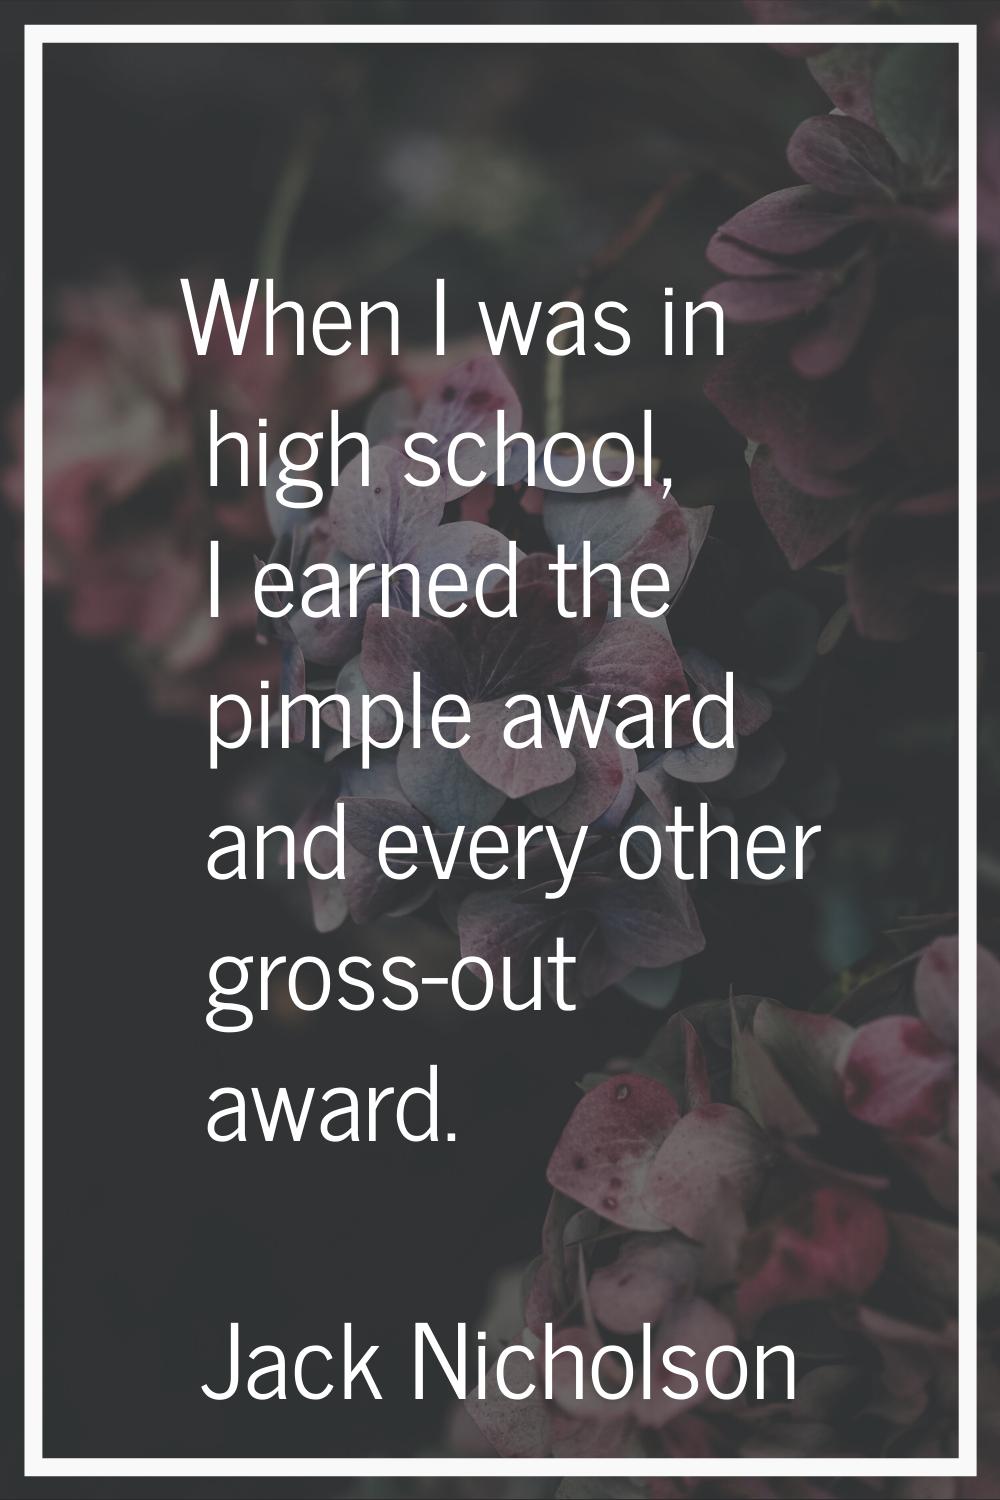 When I was in high school, I earned the pimple award and every other gross-out award.